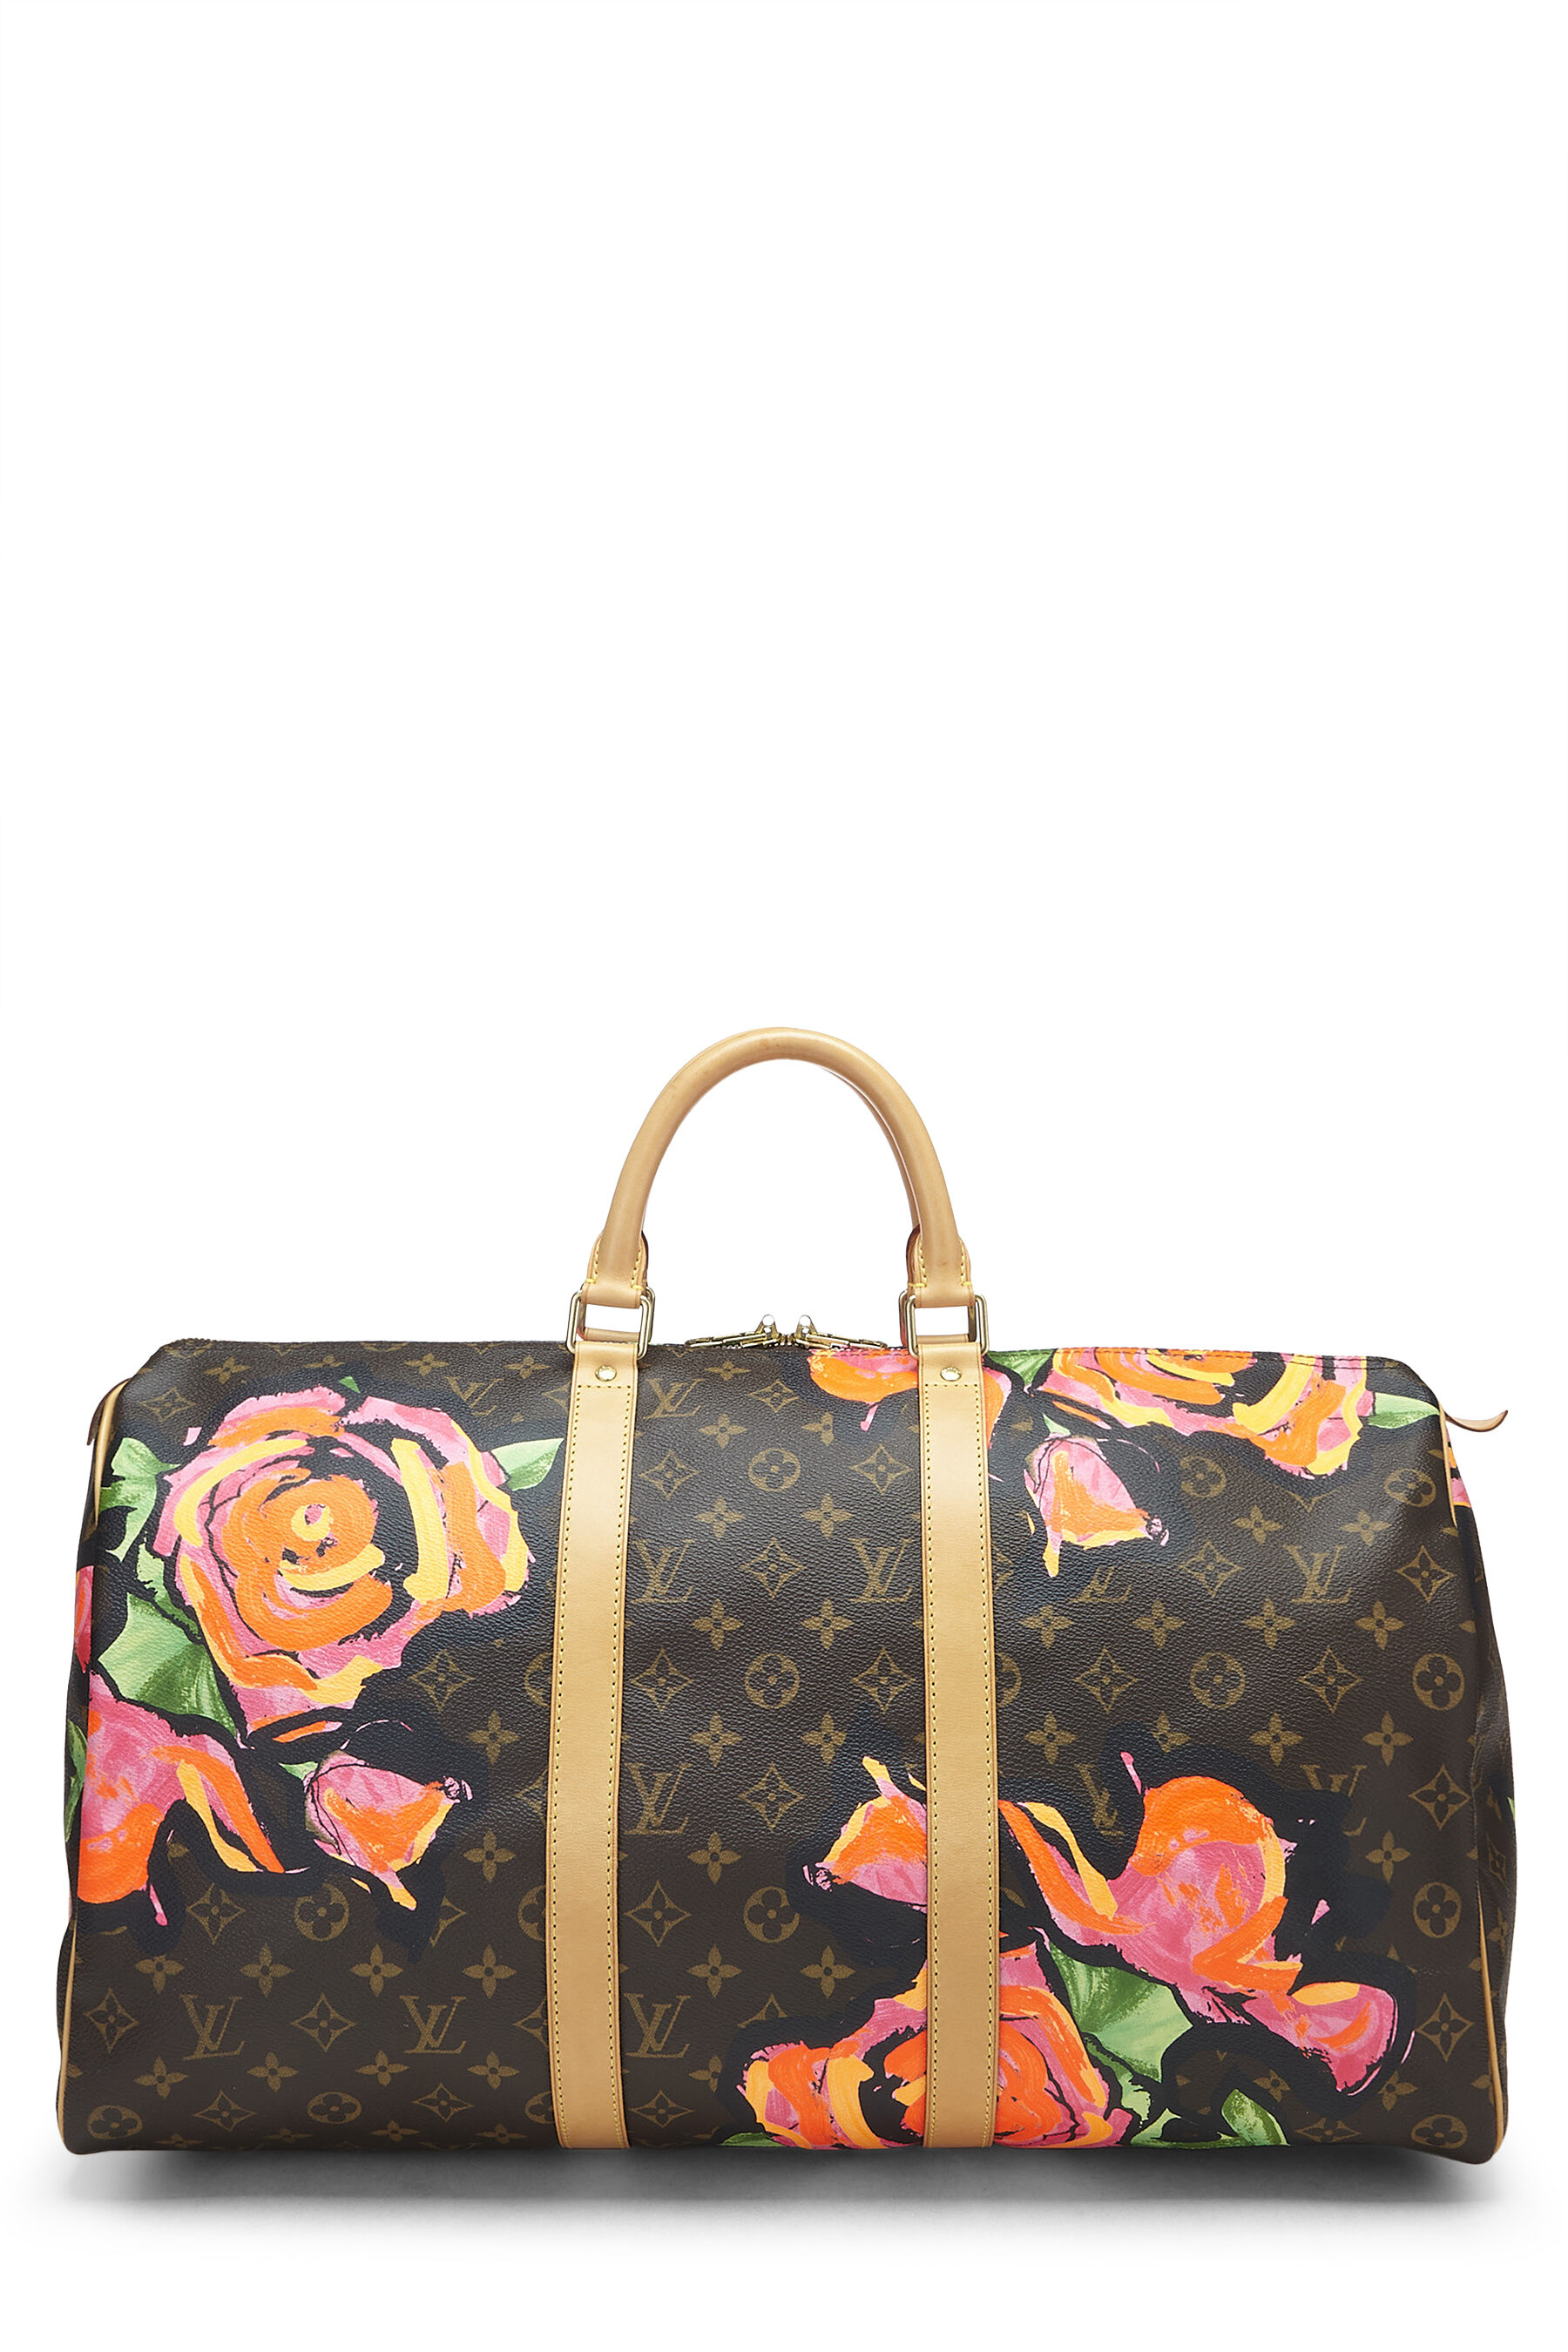 Louis Vuitton x Stephen Sprouse 2009 pre-owned Keepall 50 Bag